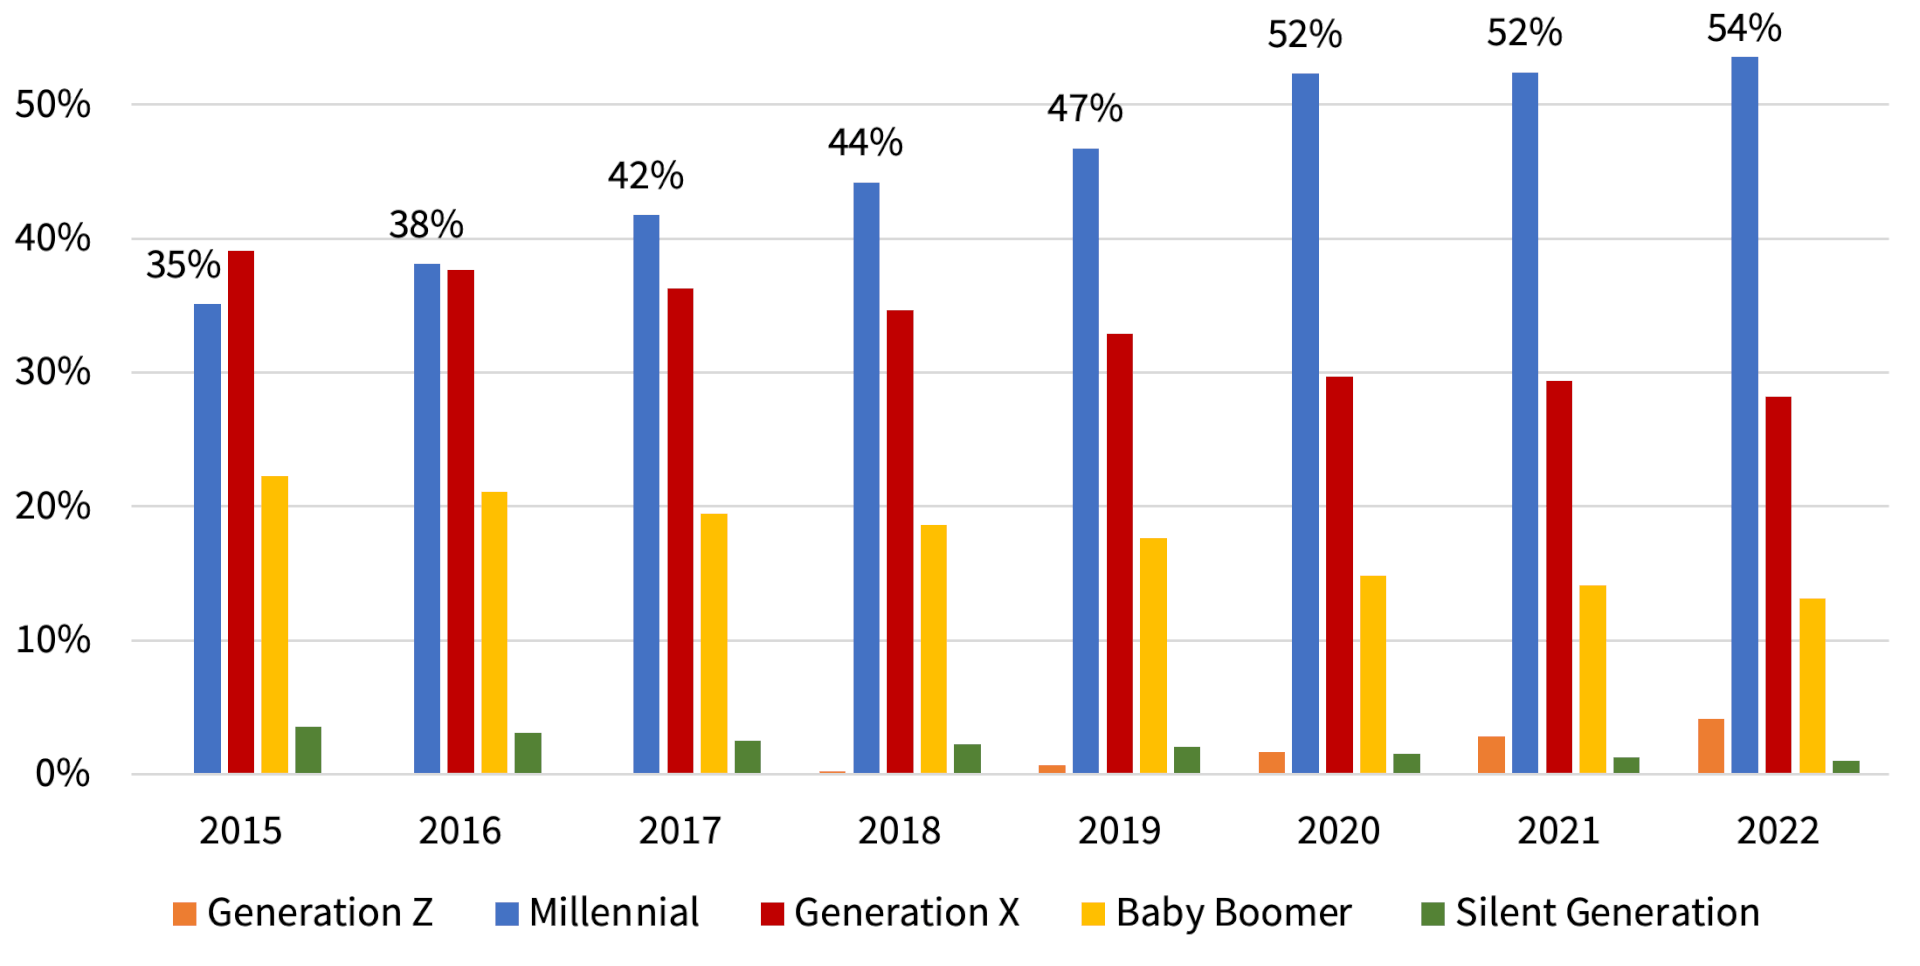 Figure 1: Millennial Home Purchase Applications Share Largest Since 2016